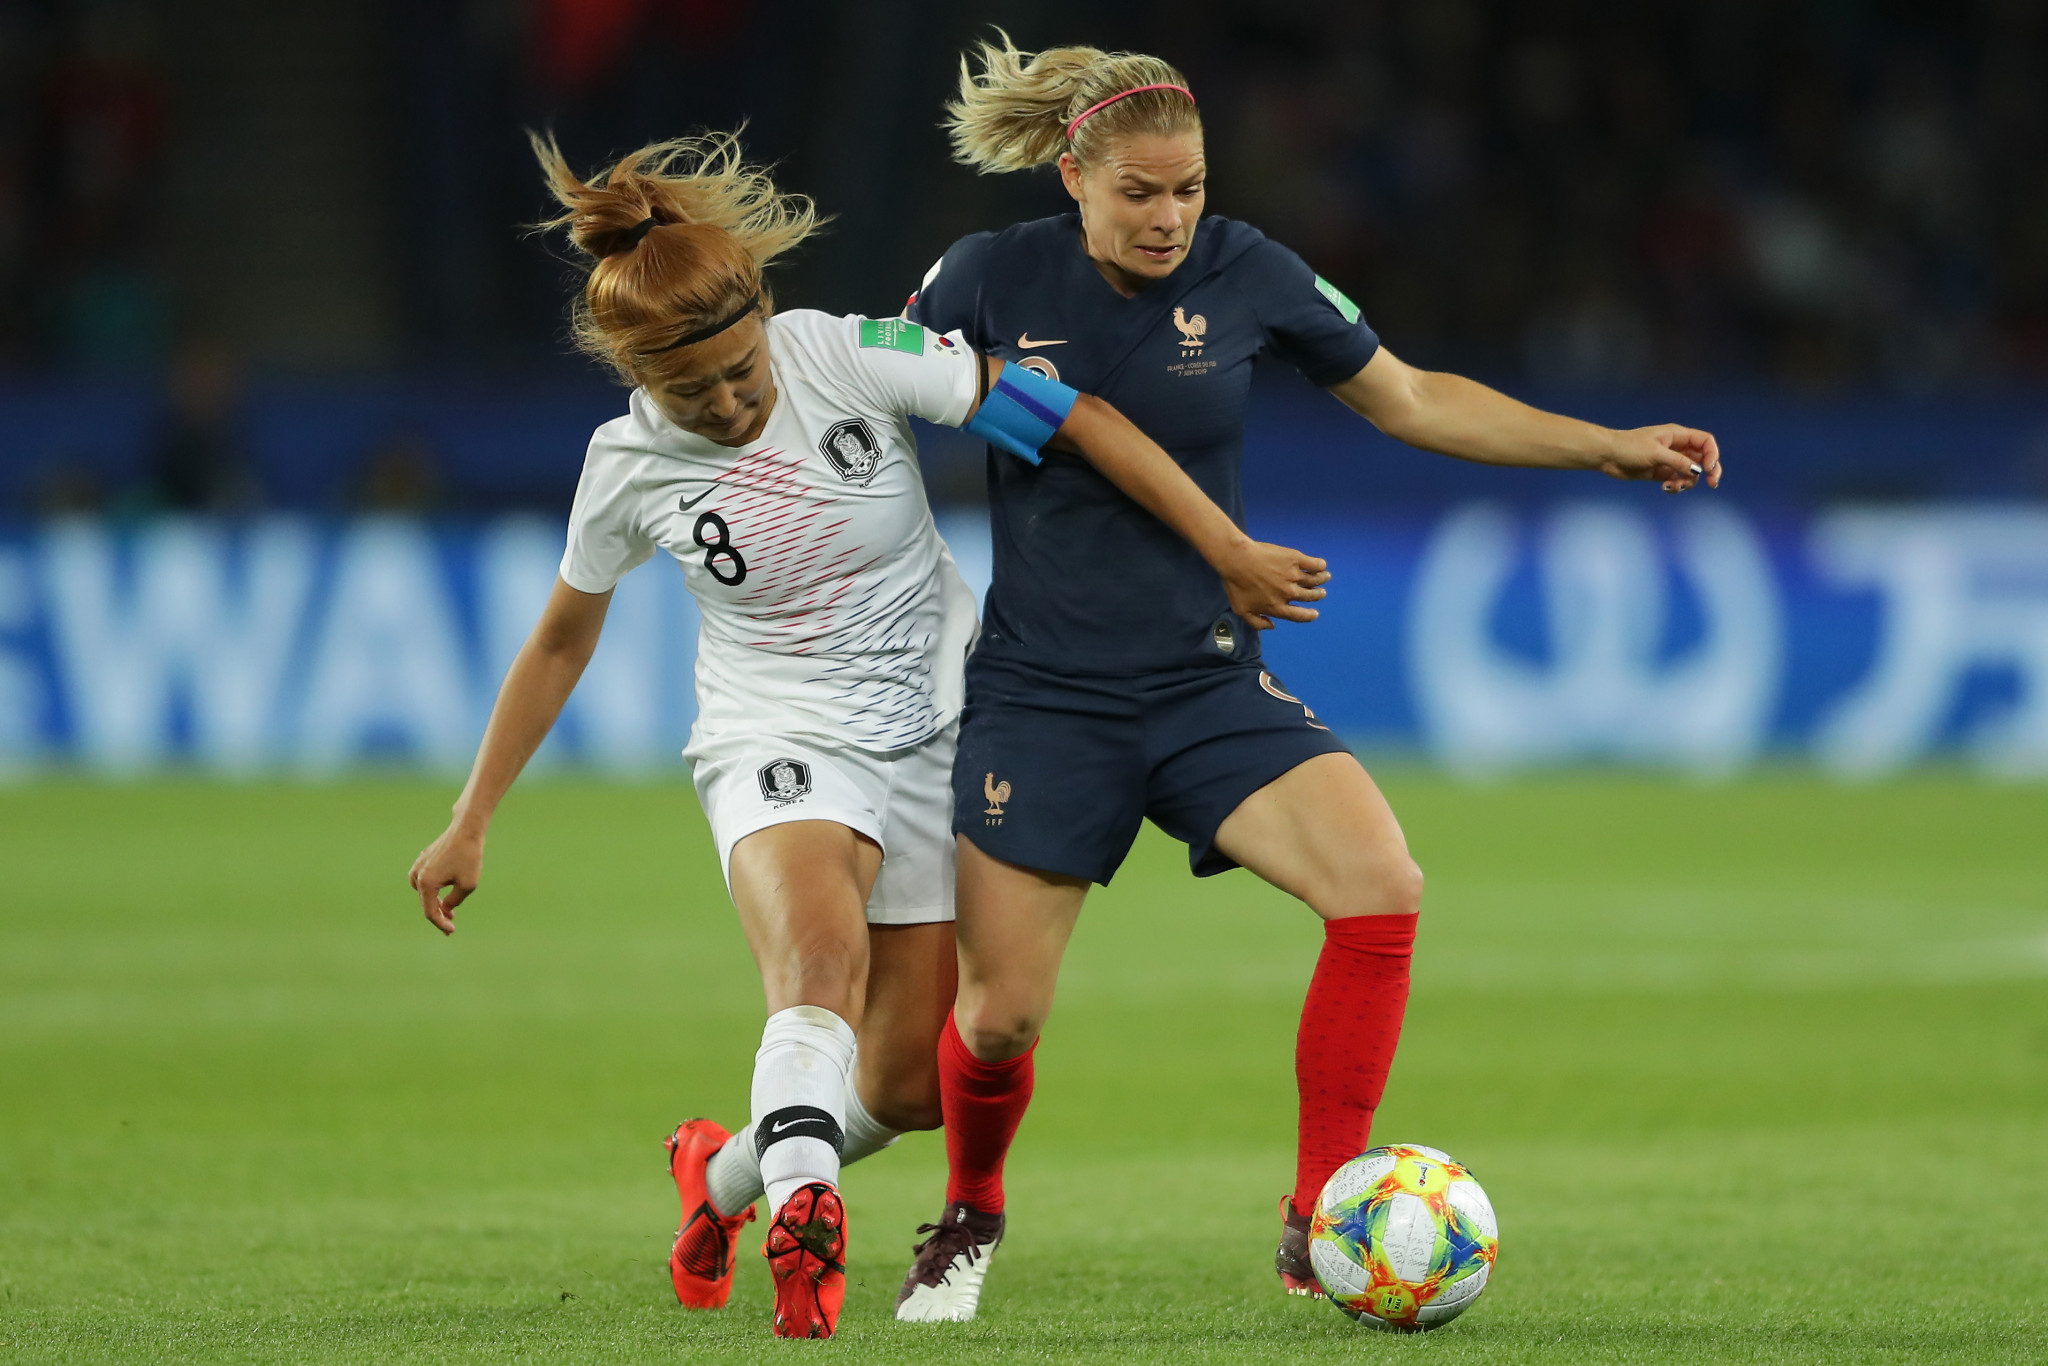 Canadian broadcasters criticize USA women's team for historic World Cup win